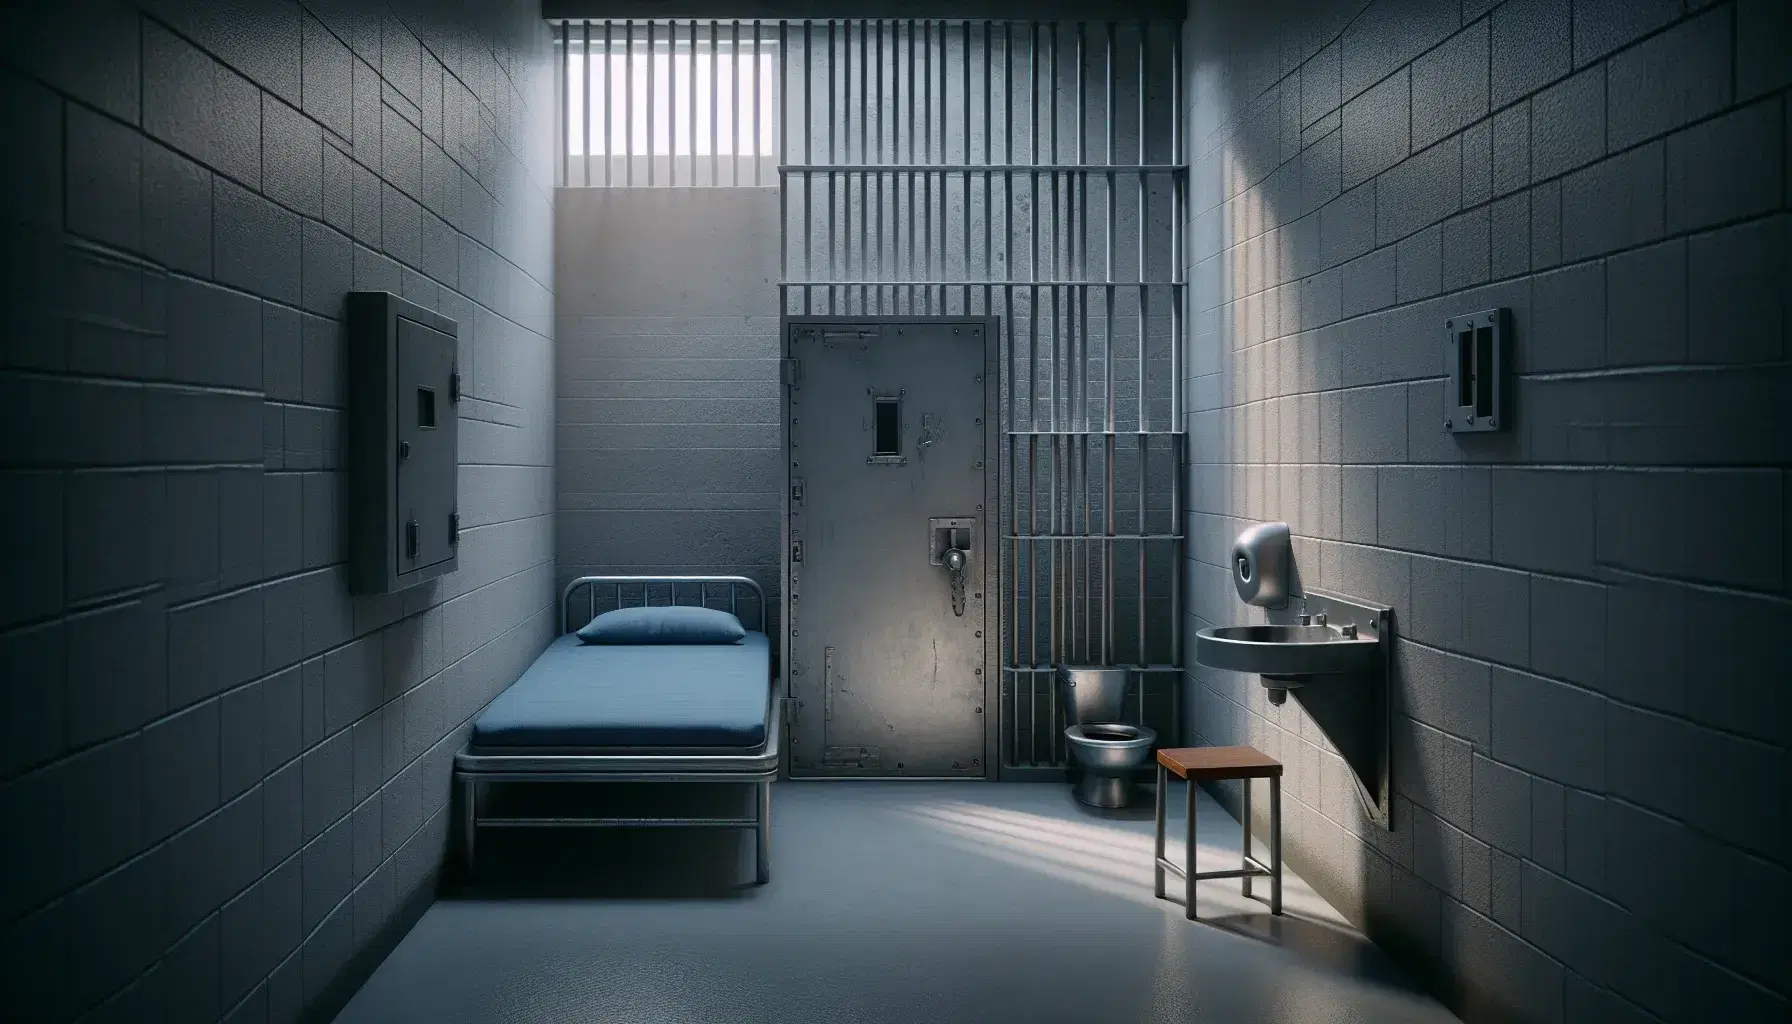 Interior of a prison cell with gray concrete walls, metal bed with blue mattress, steel toilet and small barred window.